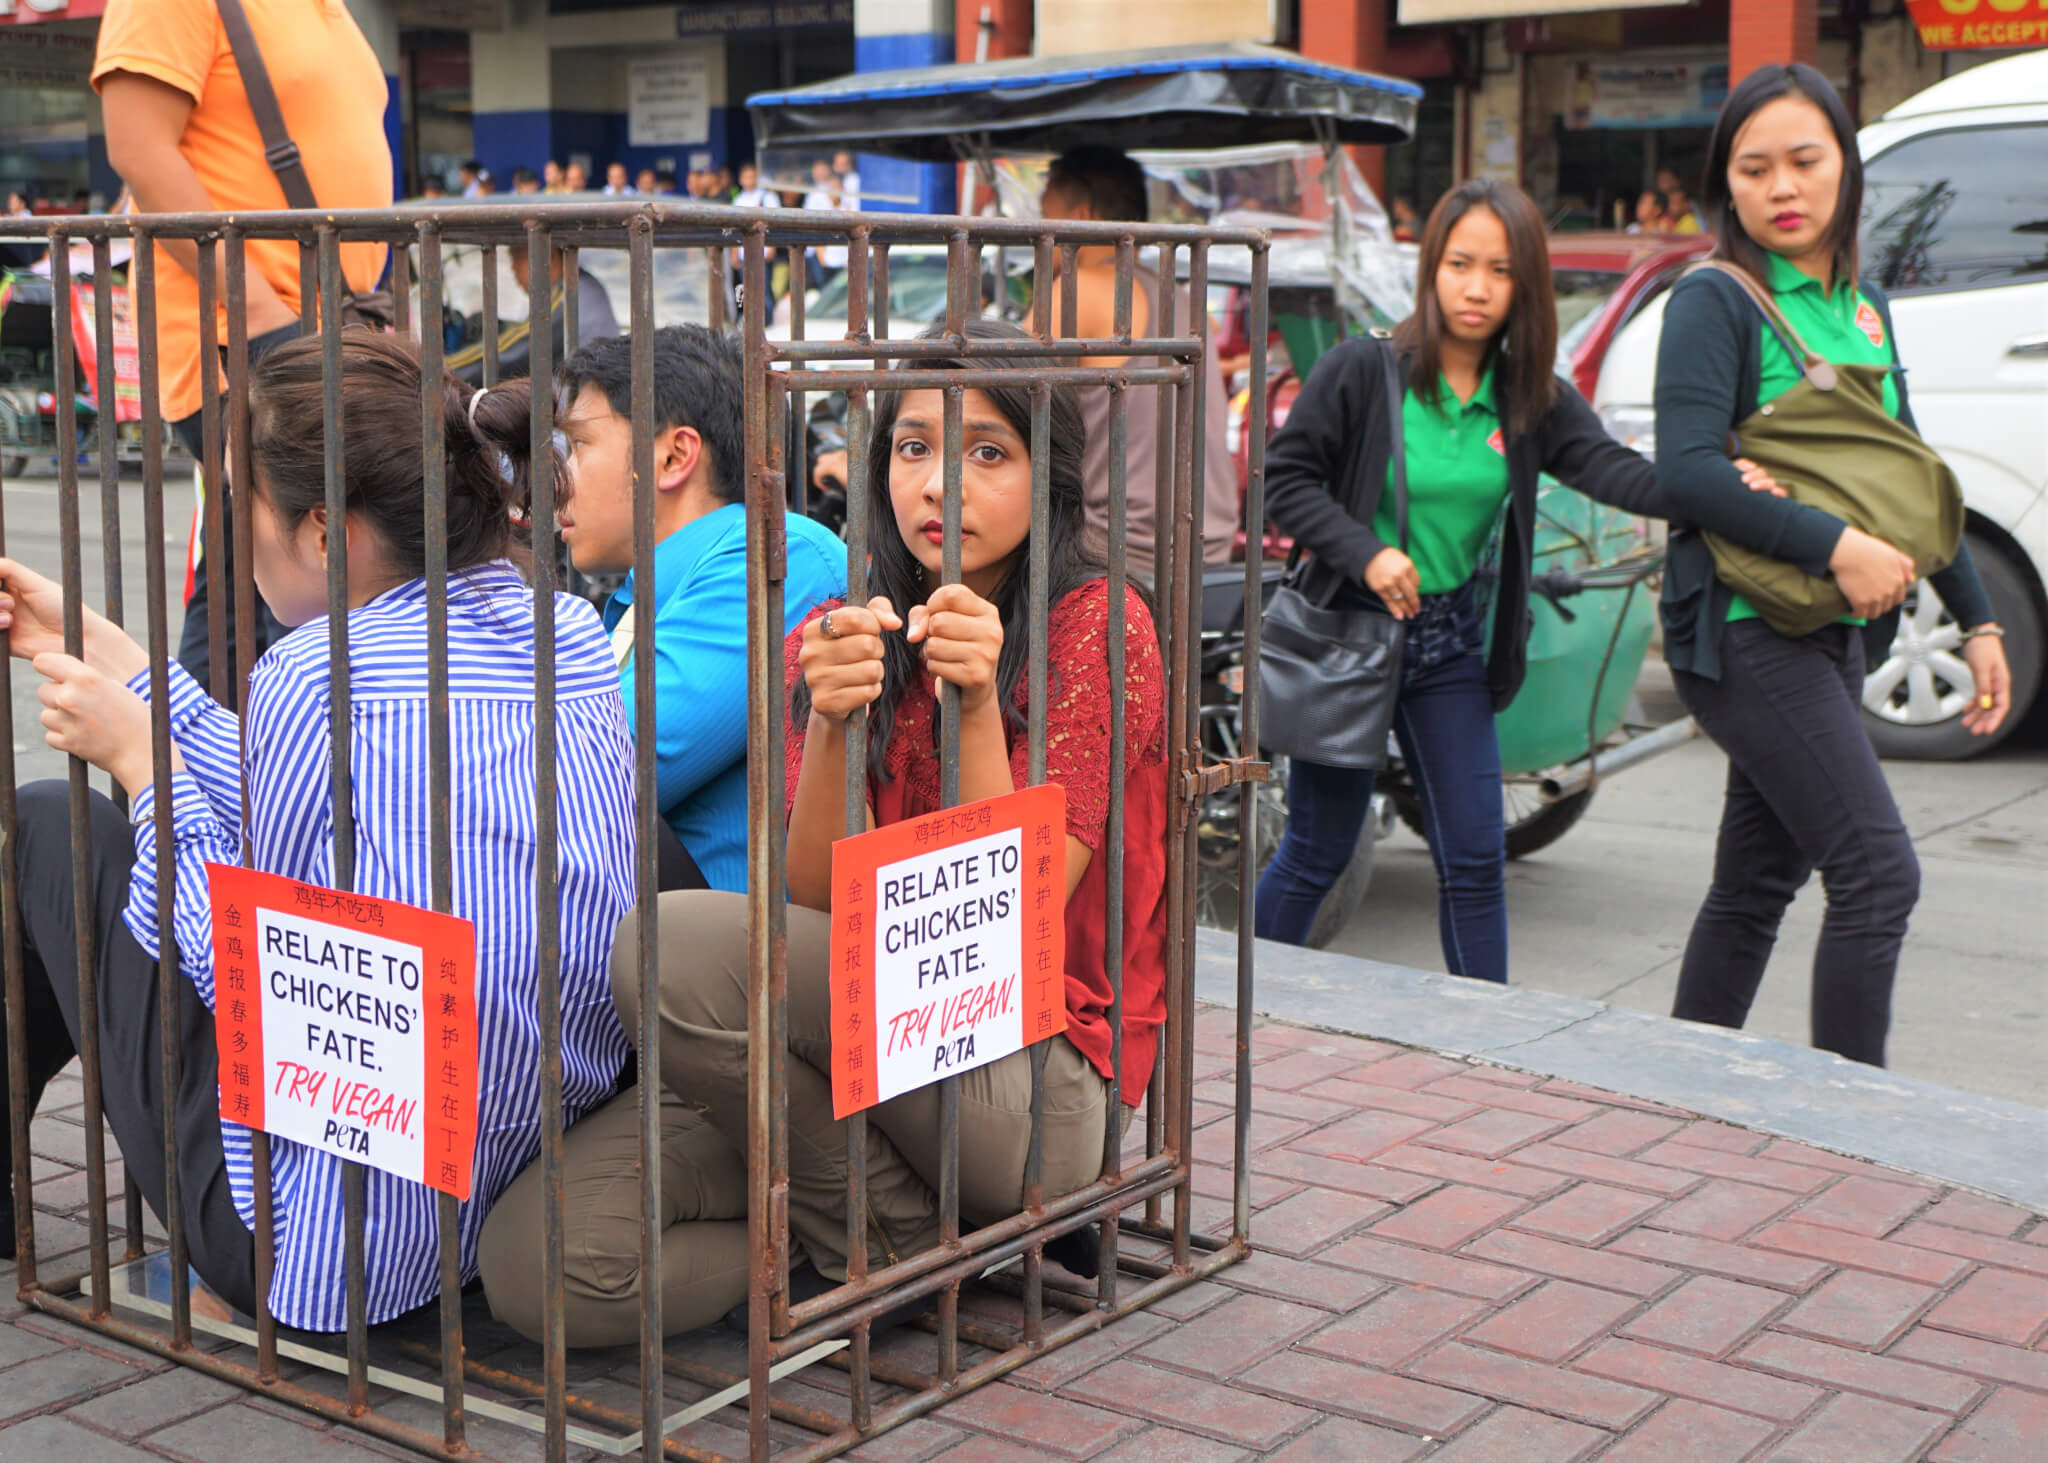 PHOTOS: PETA Members Confined to Cage for #YearOfTheChicken